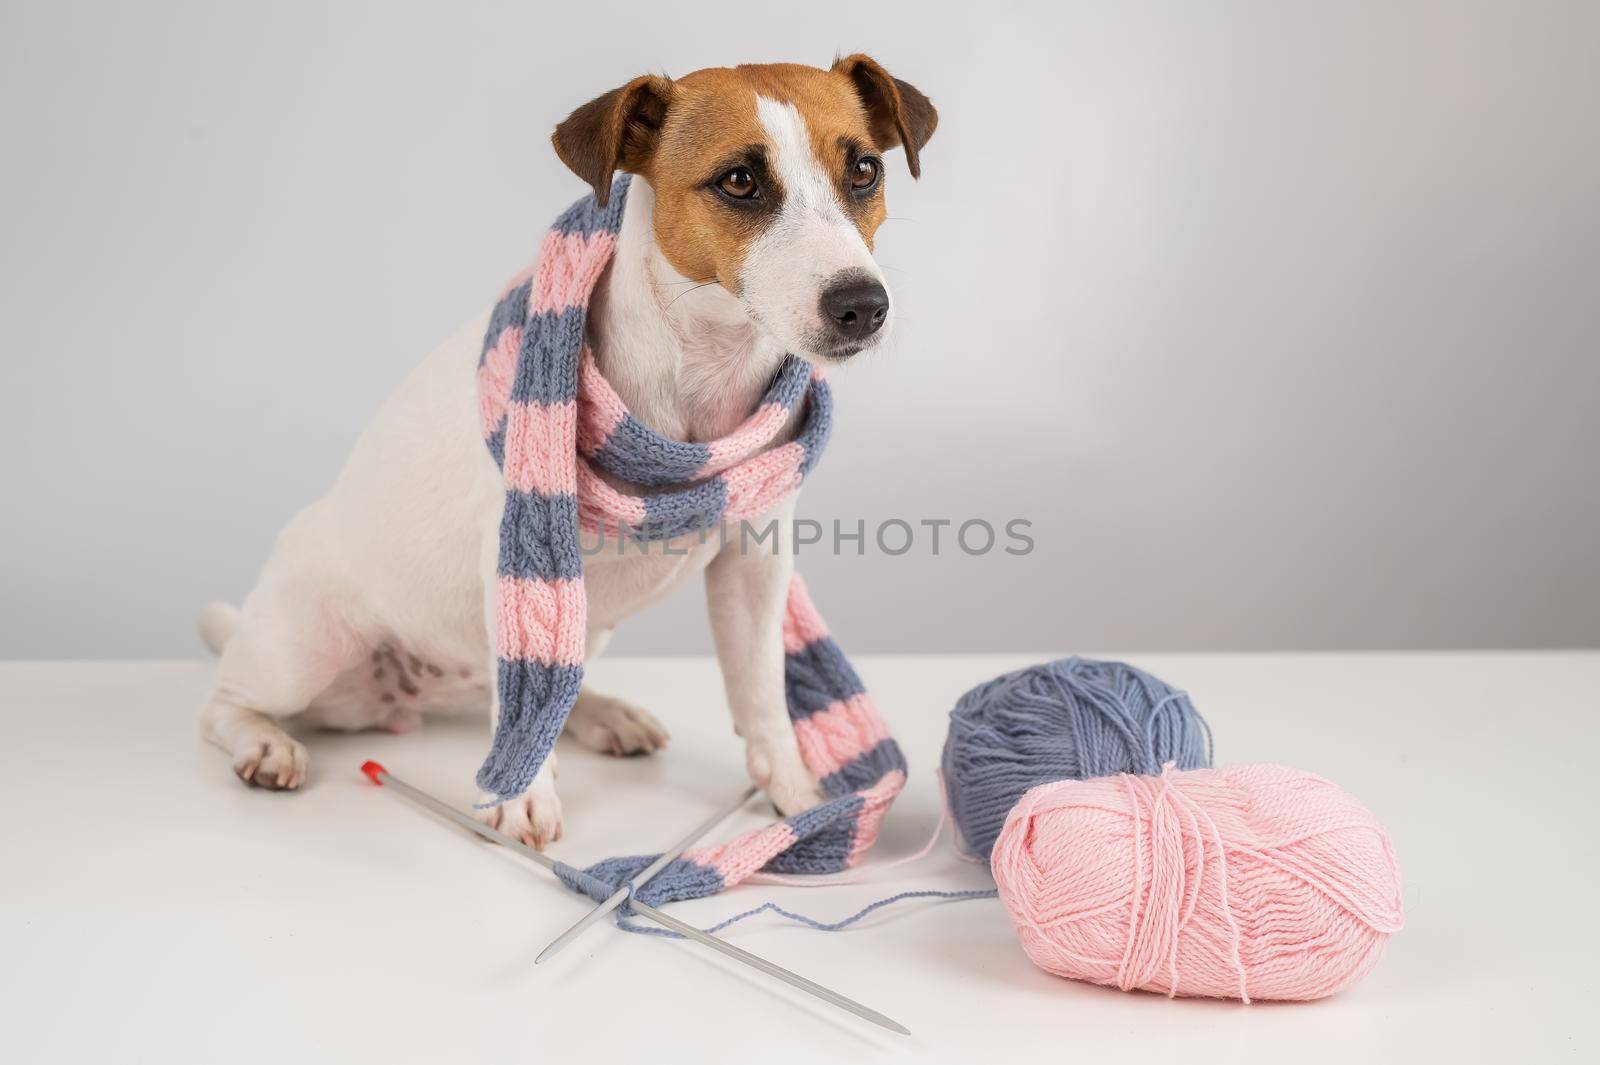 Dog jack russell terrier knits a knitted scarf on a white background. by mrwed54